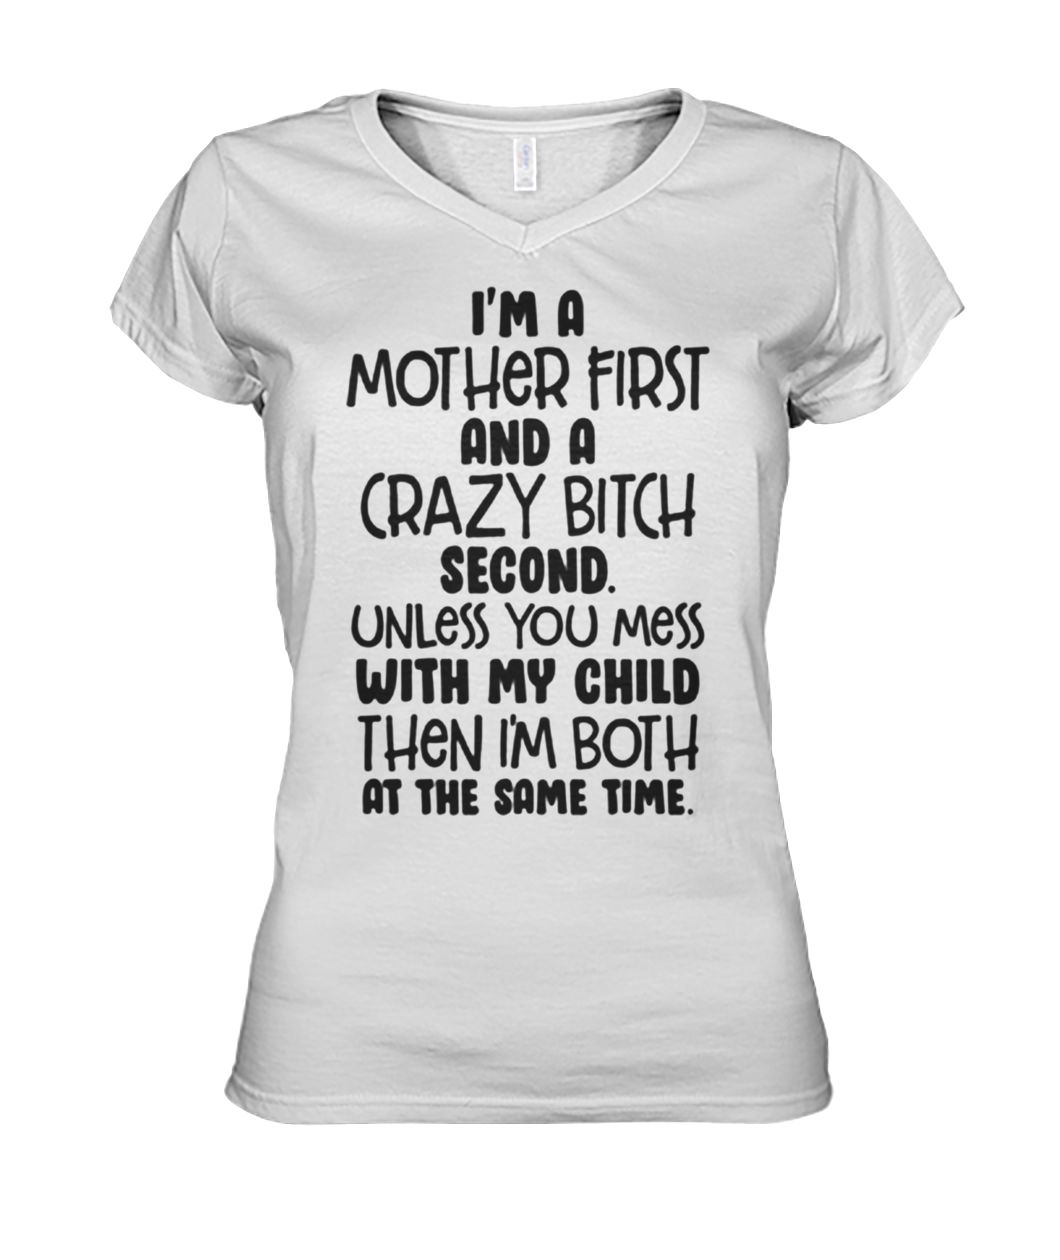 I'm a mother first and a crazy bitch second unless you mess with my child women's v-neck